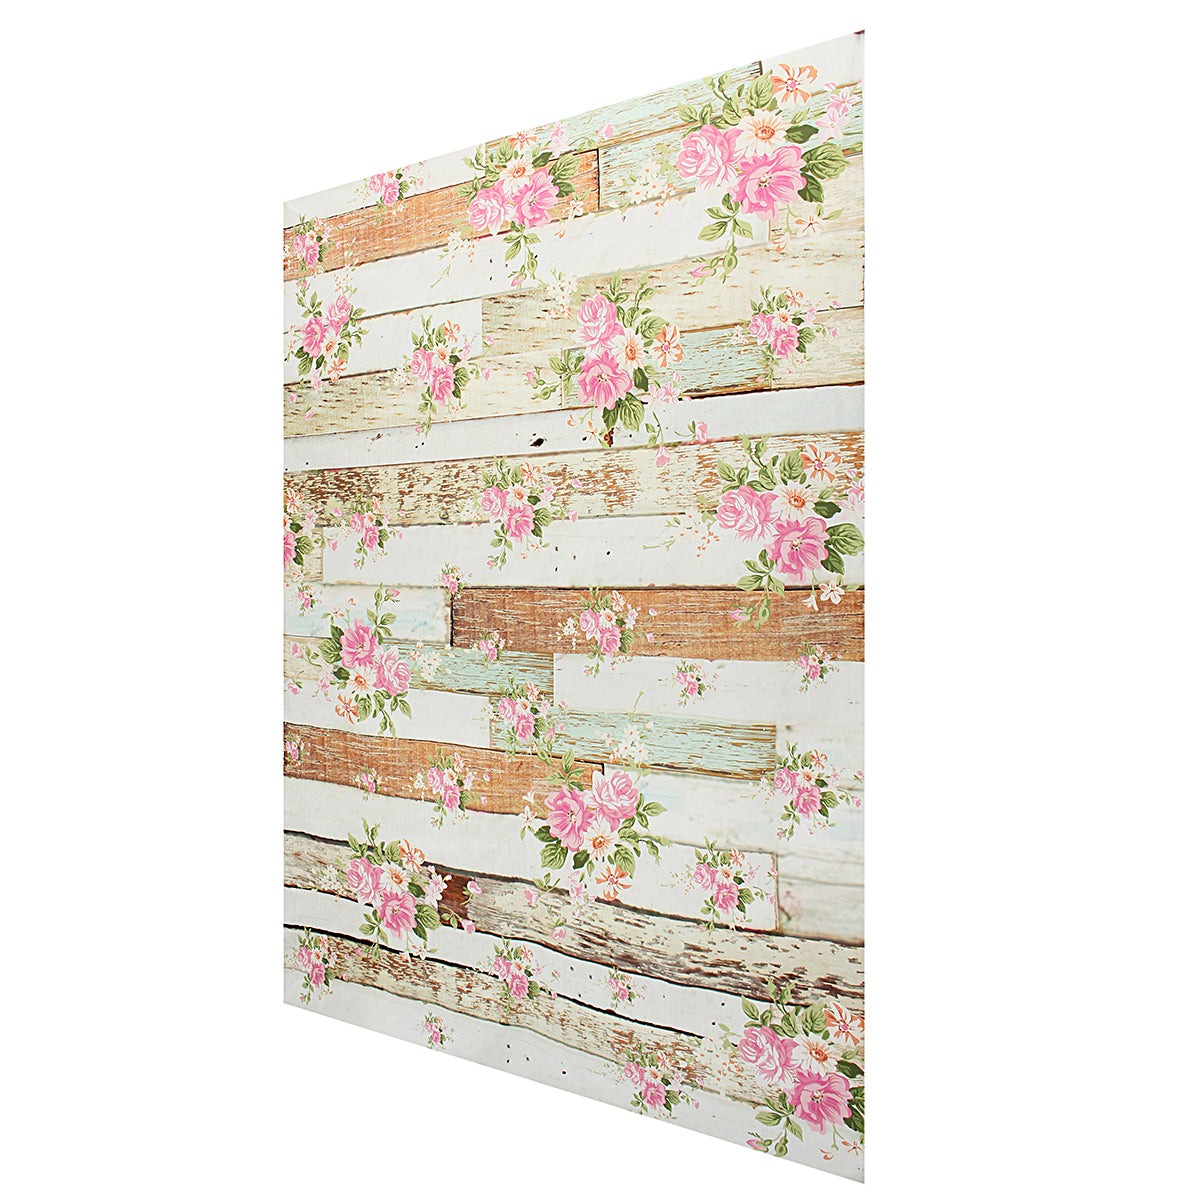 5x7FT Vintage Pink Flowers Wooden Floor Wall Photo Studio Background Backdrop Cloth